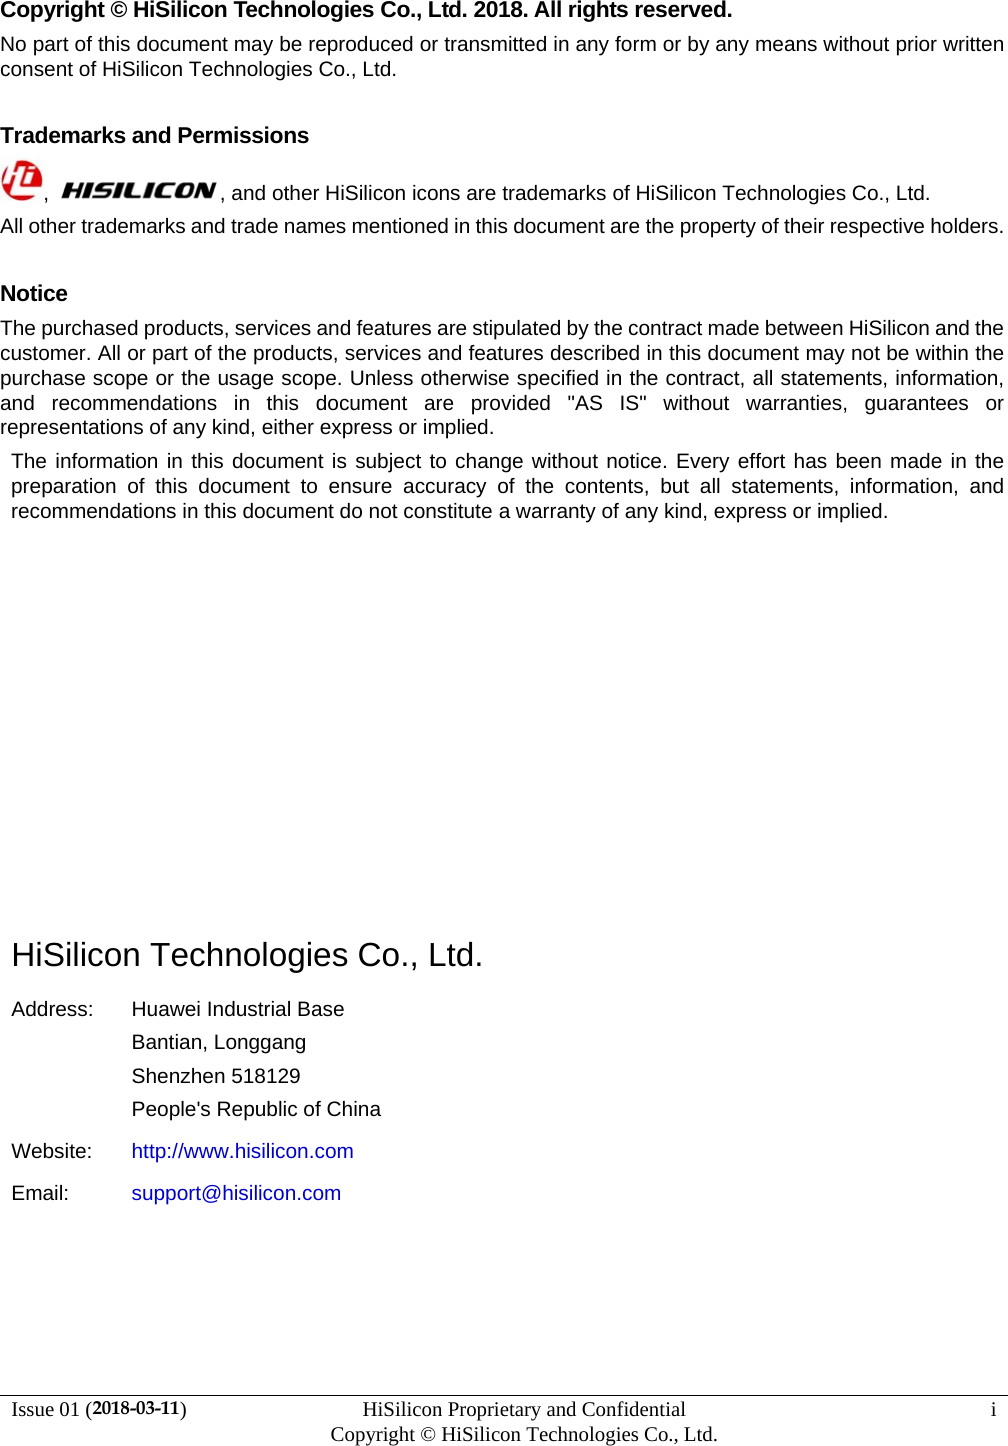 Issue 01 (2018-03-11)  HiSilicon Proprietary and Confidential          Copyright © HiSilicon Technologies Co., Ltd.  i Copyright © HiSilicon Technologies Co., Ltd. 2018. All rights reserved. No part of this document may be reproduced or transmitted in any form or by any means without prior written consent of HiSilicon Technologies Co., Ltd.  Trademarks and Permissions ,  , and other HiSilicon icons are trademarks of HiSilicon Technologies Co., Ltd. All other trademarks and trade names mentioned in this document are the property of their respective holders.  Notice The purchased products, services and features are stipulated by the contract made between HiSilicon and the customer. All or part of the products, services and features described in this document may not be within the purchase scope or the usage scope. Unless otherwise specified in the contract, all statements, information, and recommendations in this document are provided &quot;AS IS&quot; without warranties, guarantees or representations of any kind, either express or implied. The information in this document is subject to change without notice. Every effort has been made in the preparation of this document to ensure accuracy of the contents, but all statements, information, and recommendations in this document do not constitute a warranty of any kind, express or implied.            HiSilicon Technologies Co., Ltd. Address:  Huawei Industrial Base Bantian, Longgang Shenzhen 518129 People&apos;s Republic of China Website:  http://www.hisilicon.com Email:  support@hisilicon.com    